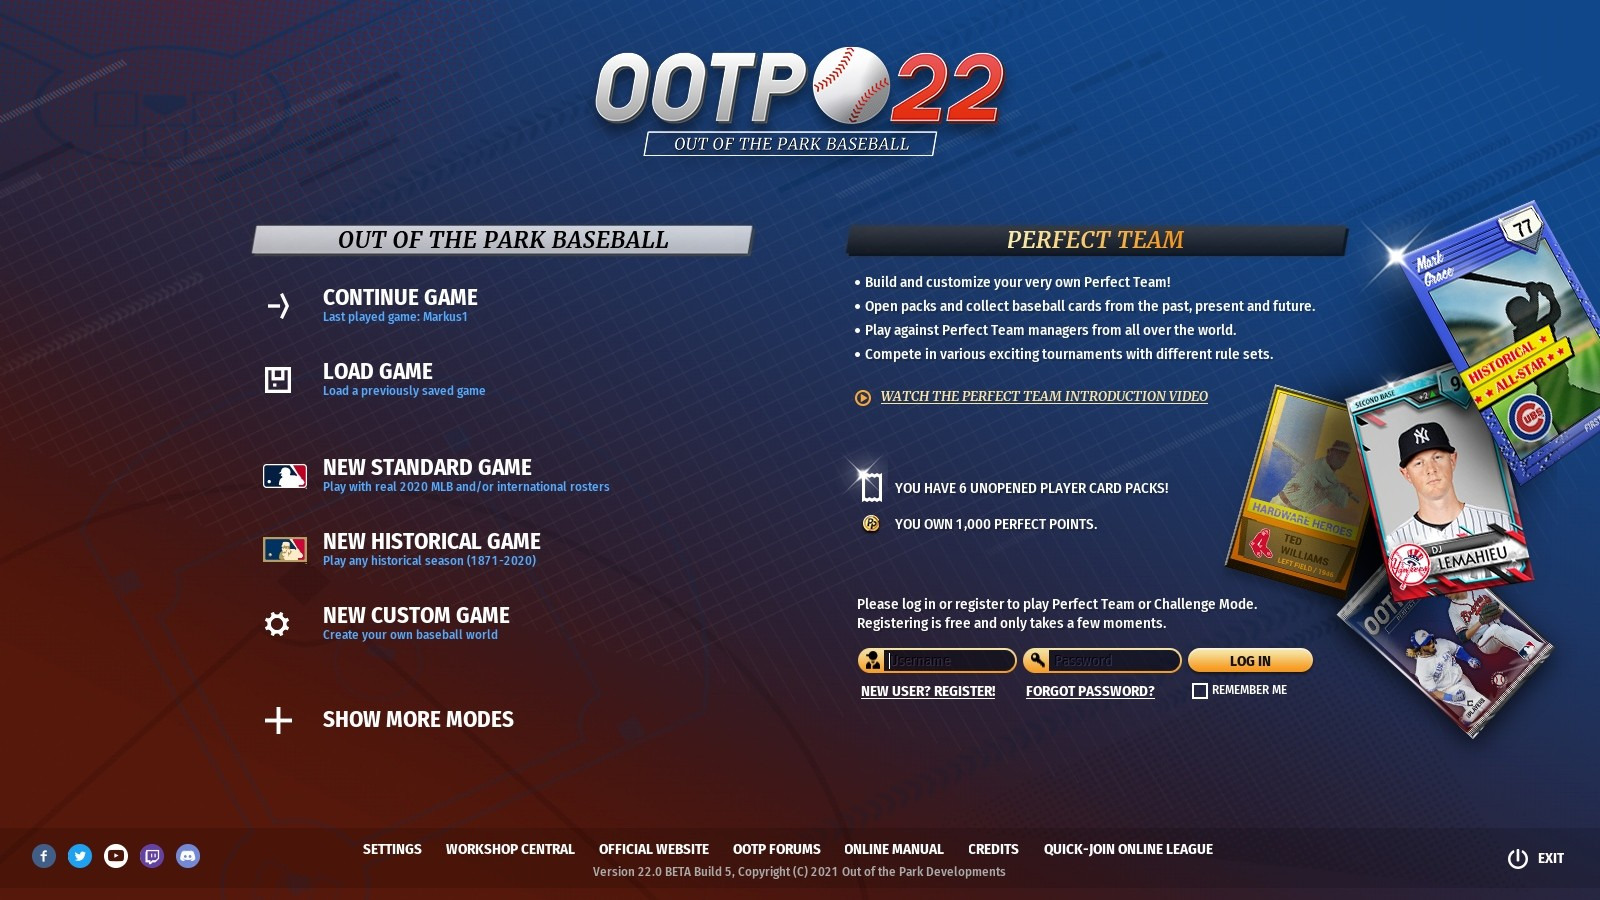 Out of the Park Baseball OOTP 22 (PC, Mac, Linux)